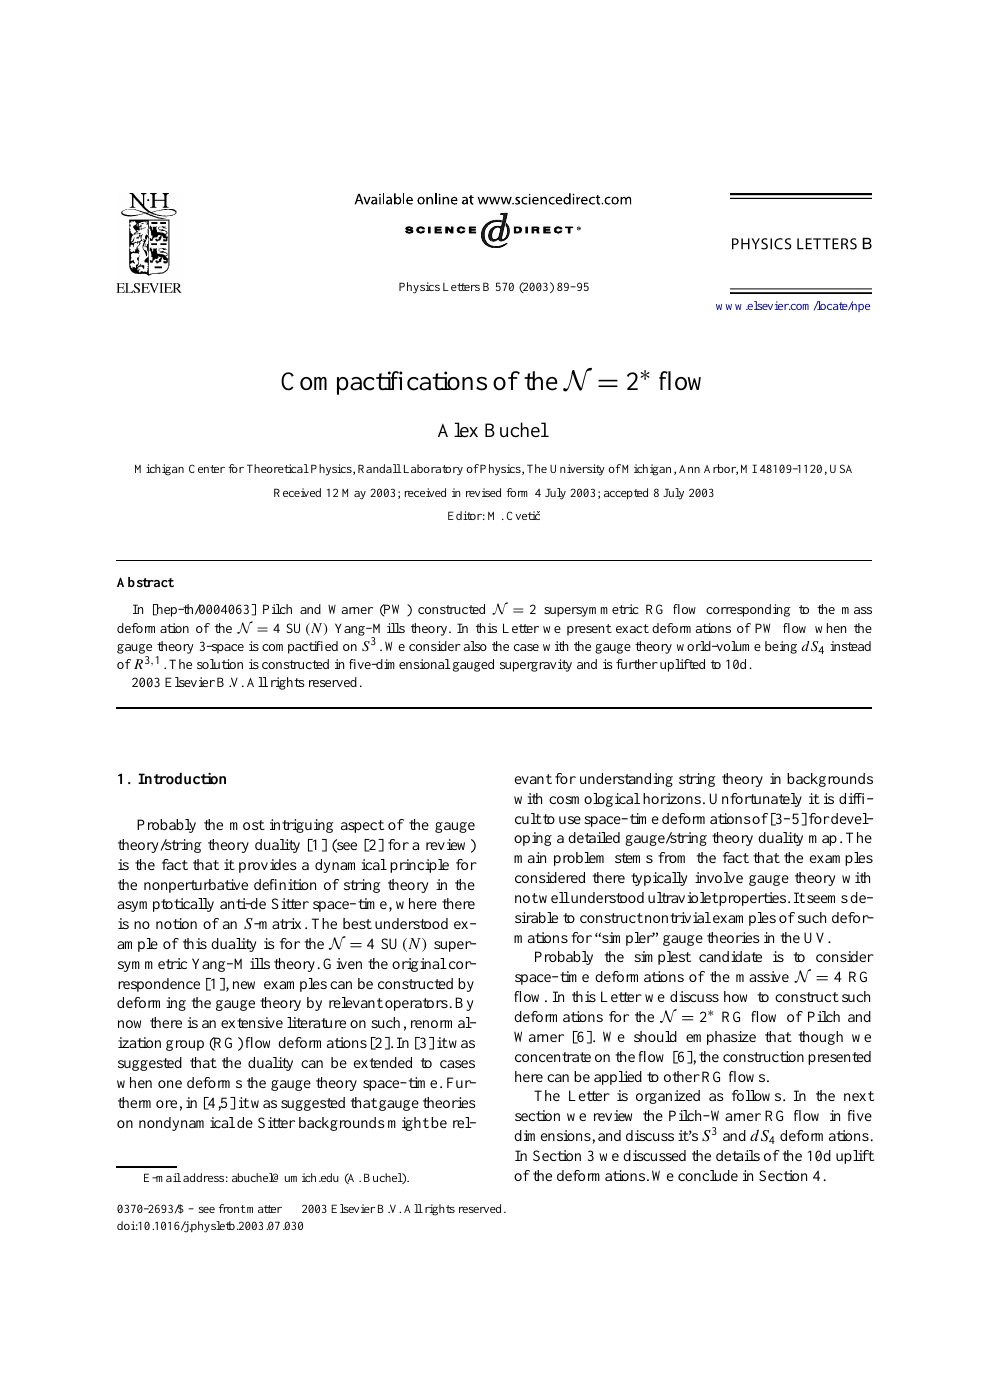 Compactifications Of The N 2 Flow Topic Of Research Paper In Physical Sciences Download Scholarly Article Pdf And Read For Free On Cyberleninka Open Science Hub